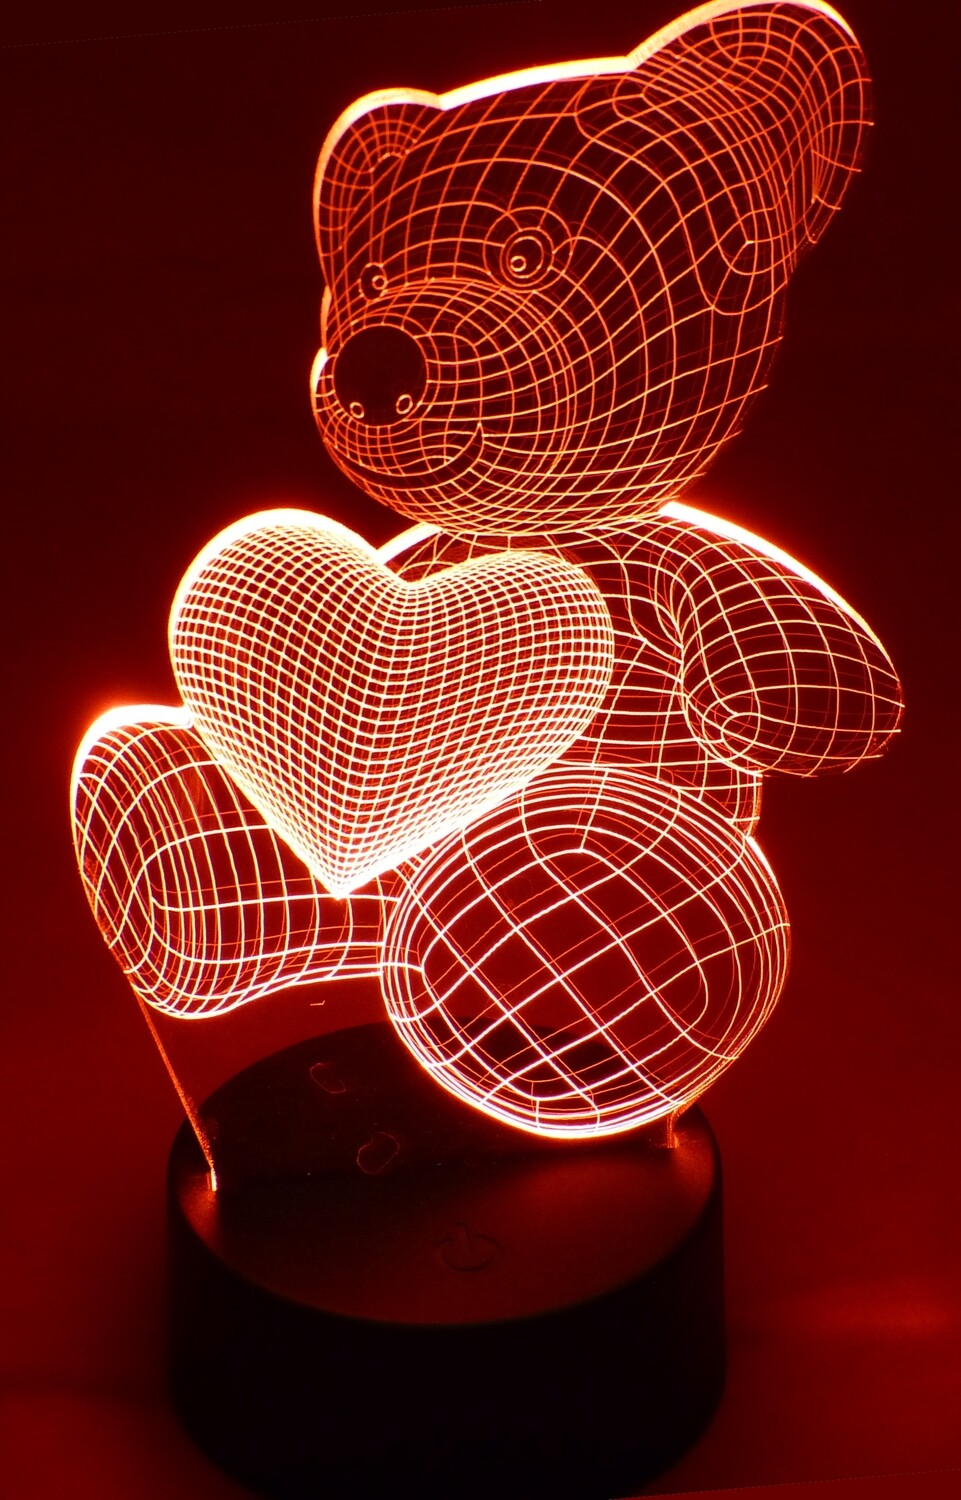 Valentines gift: 3d teddy bear with a heart